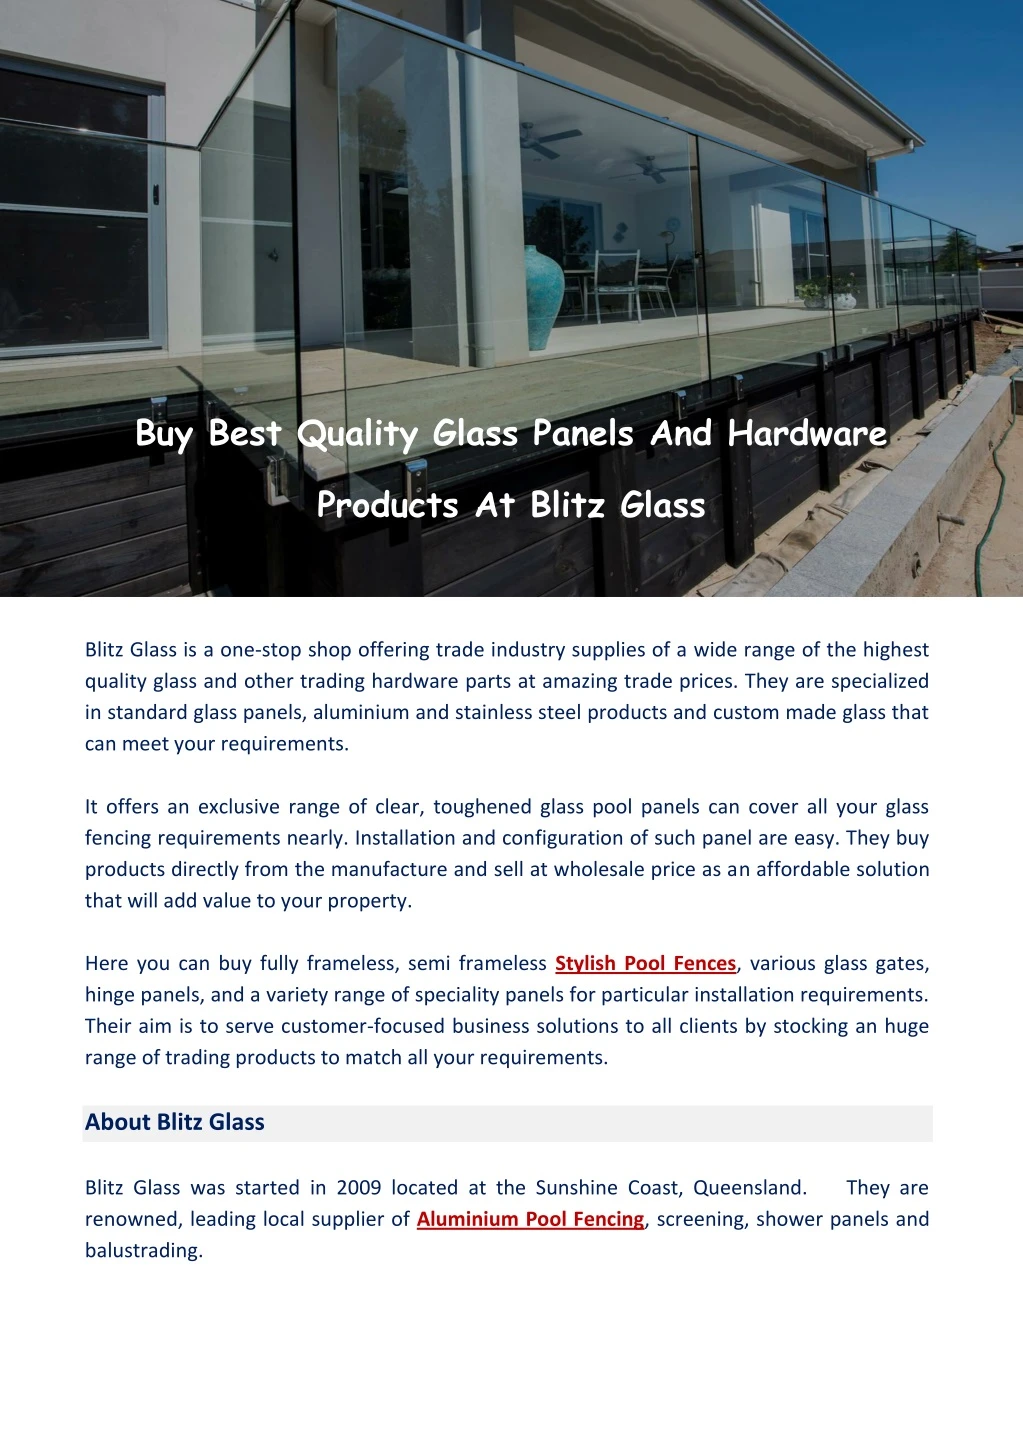 buy best quality glass panels and hardware